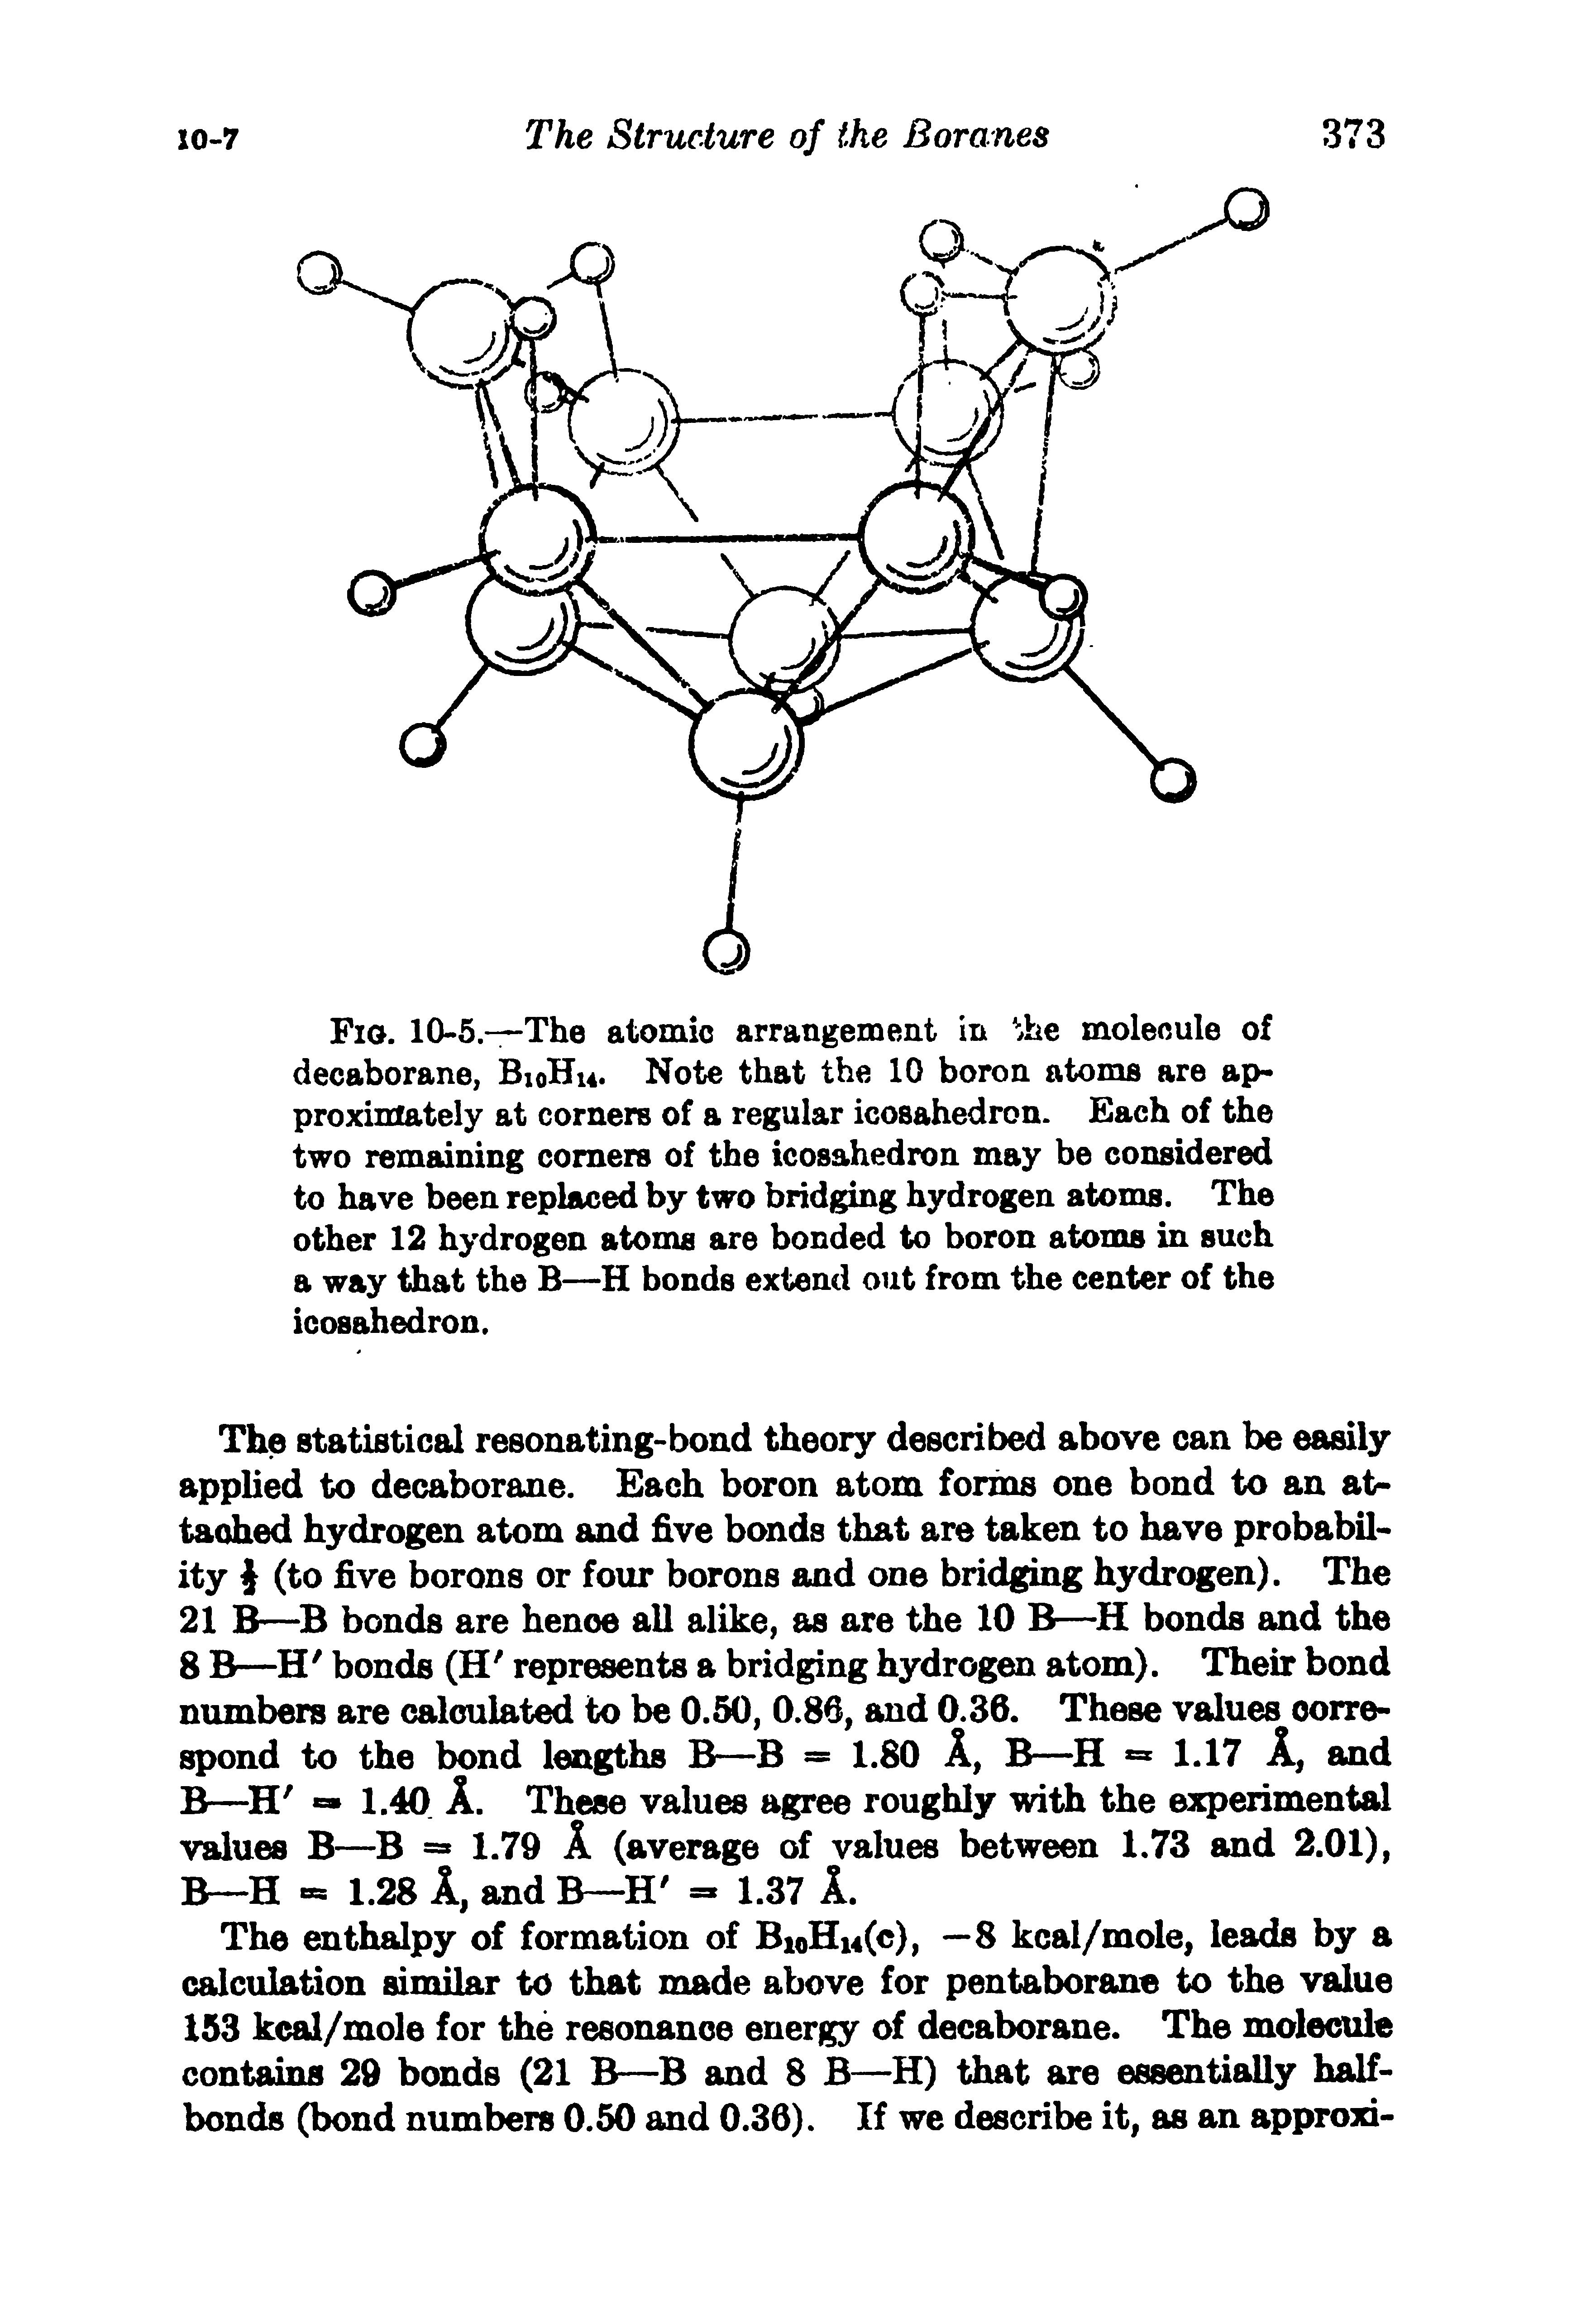 Fig. 10-5.—The atomic arrangement in e molecule of decaborane, Bi0Hu. Note that the 10 boron atoms are approximately at corners of a regular icosahedron. Each of the two remaining corners of the icosahedron may be considered to have been replaced by two bridging hydrogen atoms. The other 12 hydrogen atoms are bonded to boron atoms in such a way that the B—H bonds extend out from the center of the icosahedron.